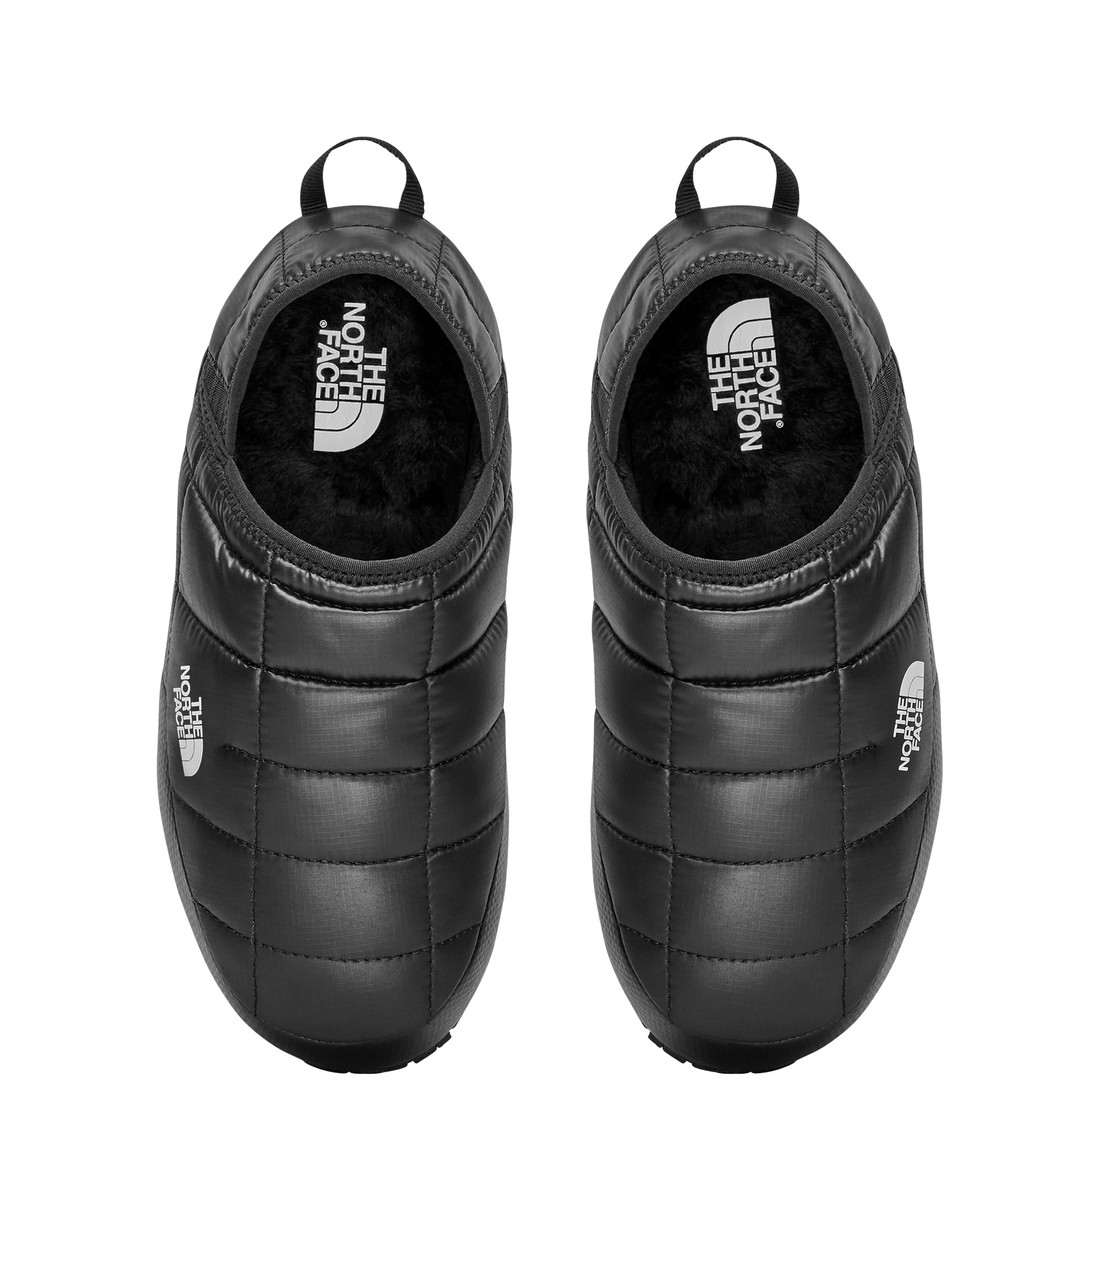 Thermoball Traction Mules V TNF Black/TNF Black